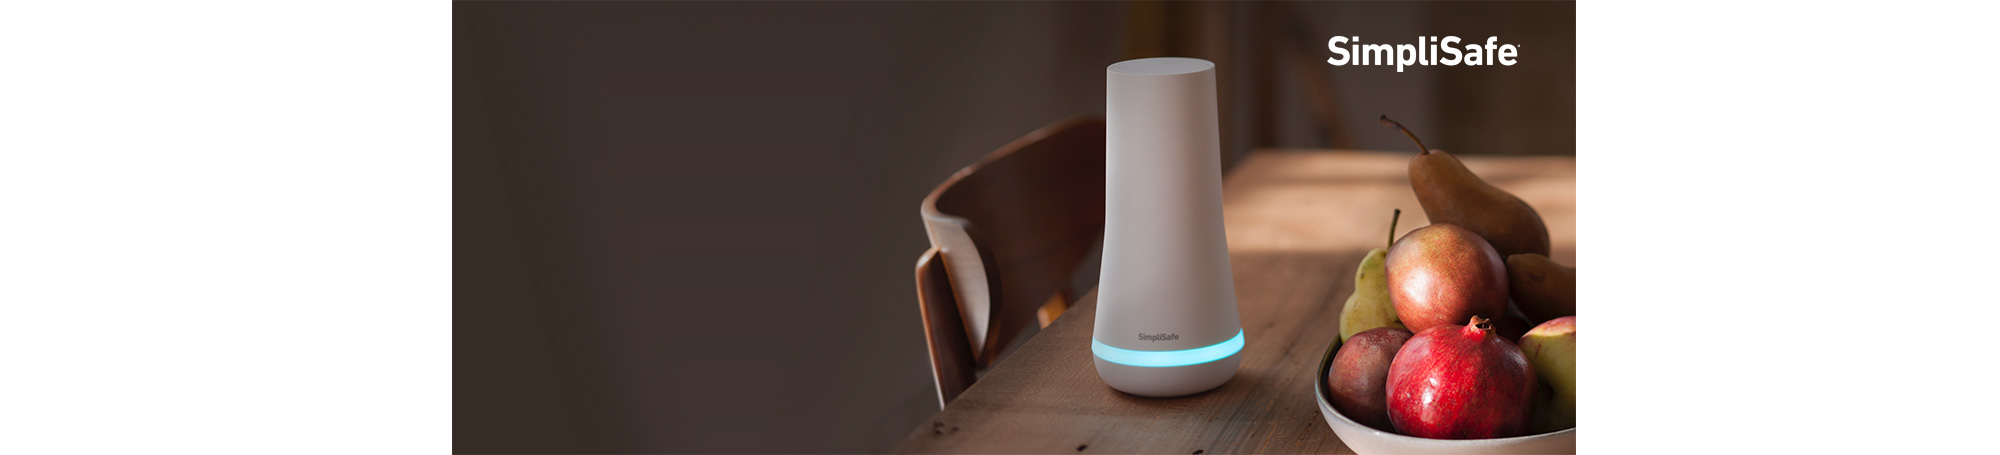 SimpliSafe security system on table